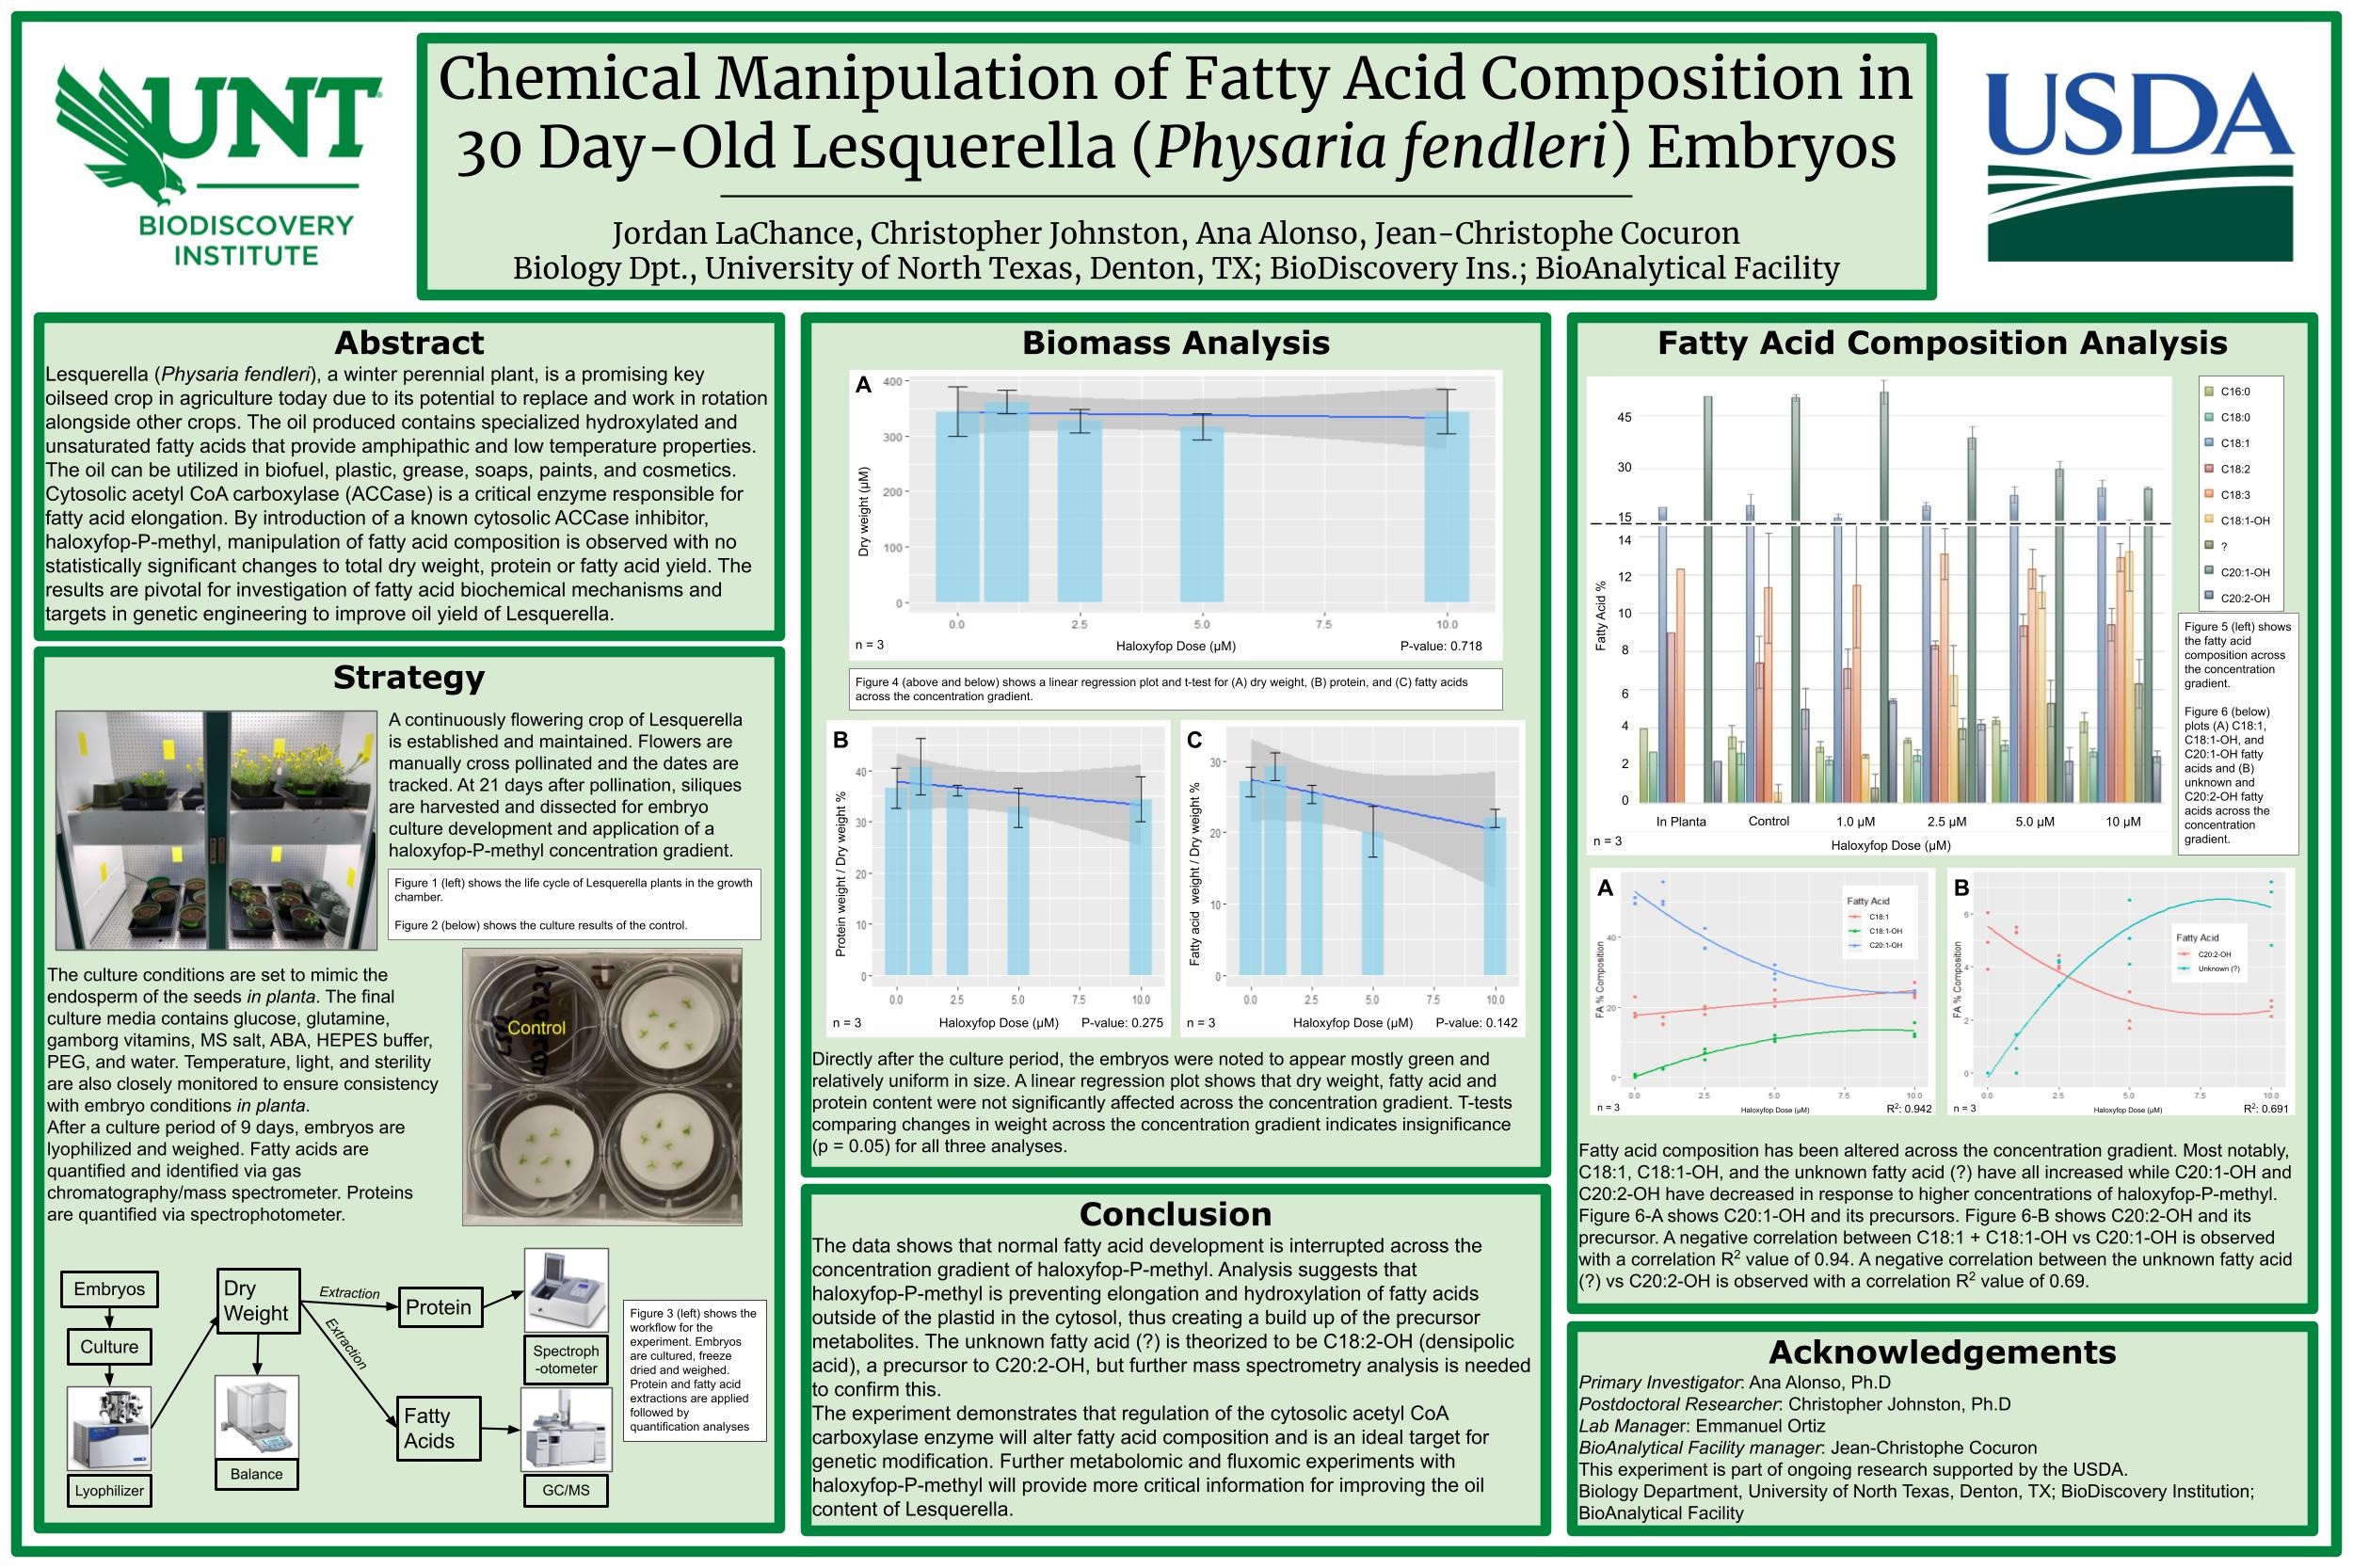 Chemical Manipulation of Fatty Acid Composition in 30 Day-Old Lesquerella (Physaria fendleri) Embryo